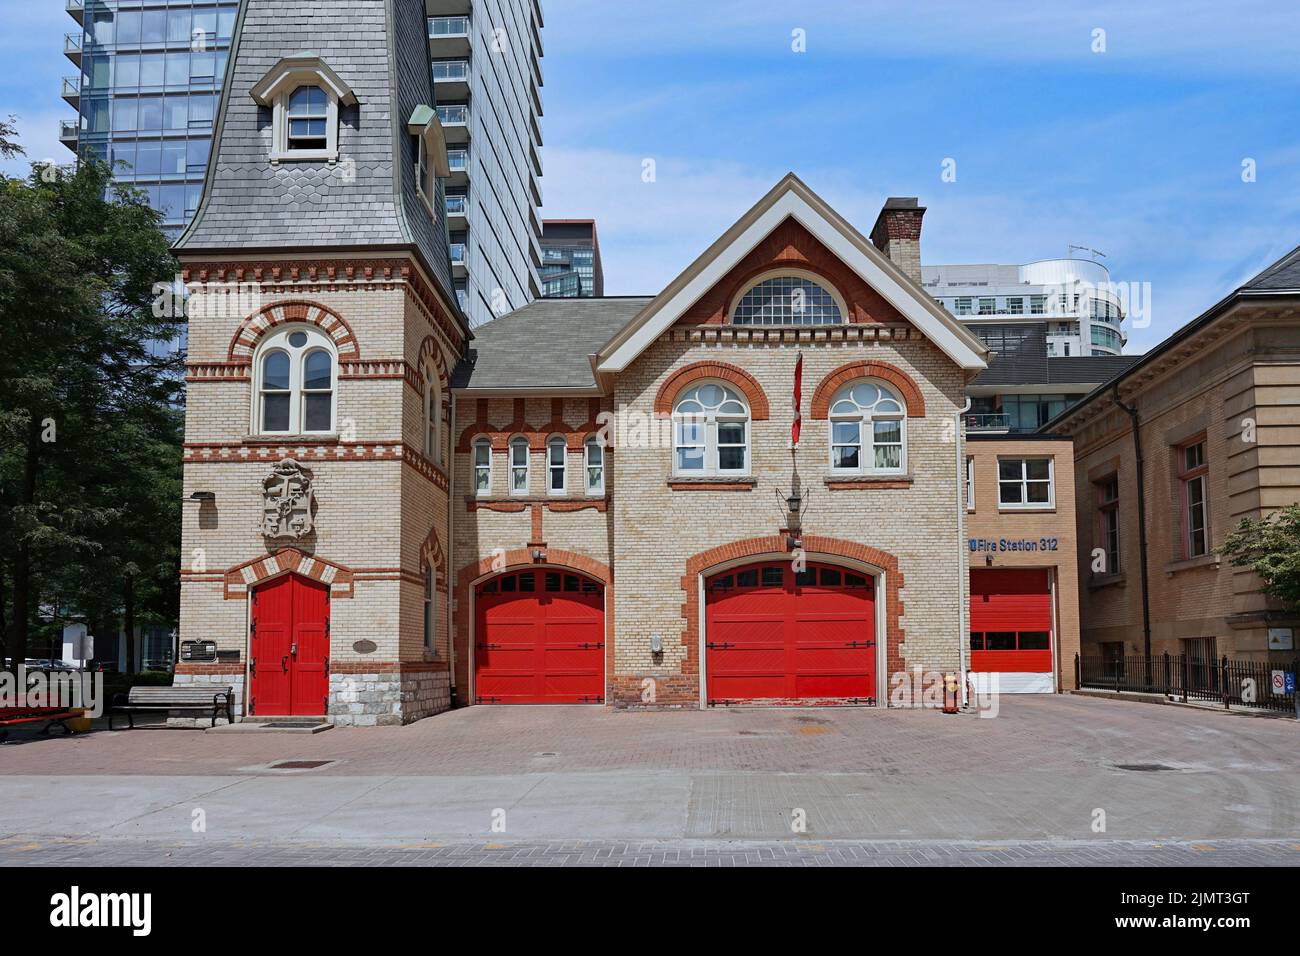 Old fashioned fire station surrounded by modern apartment buildings Stock Photo